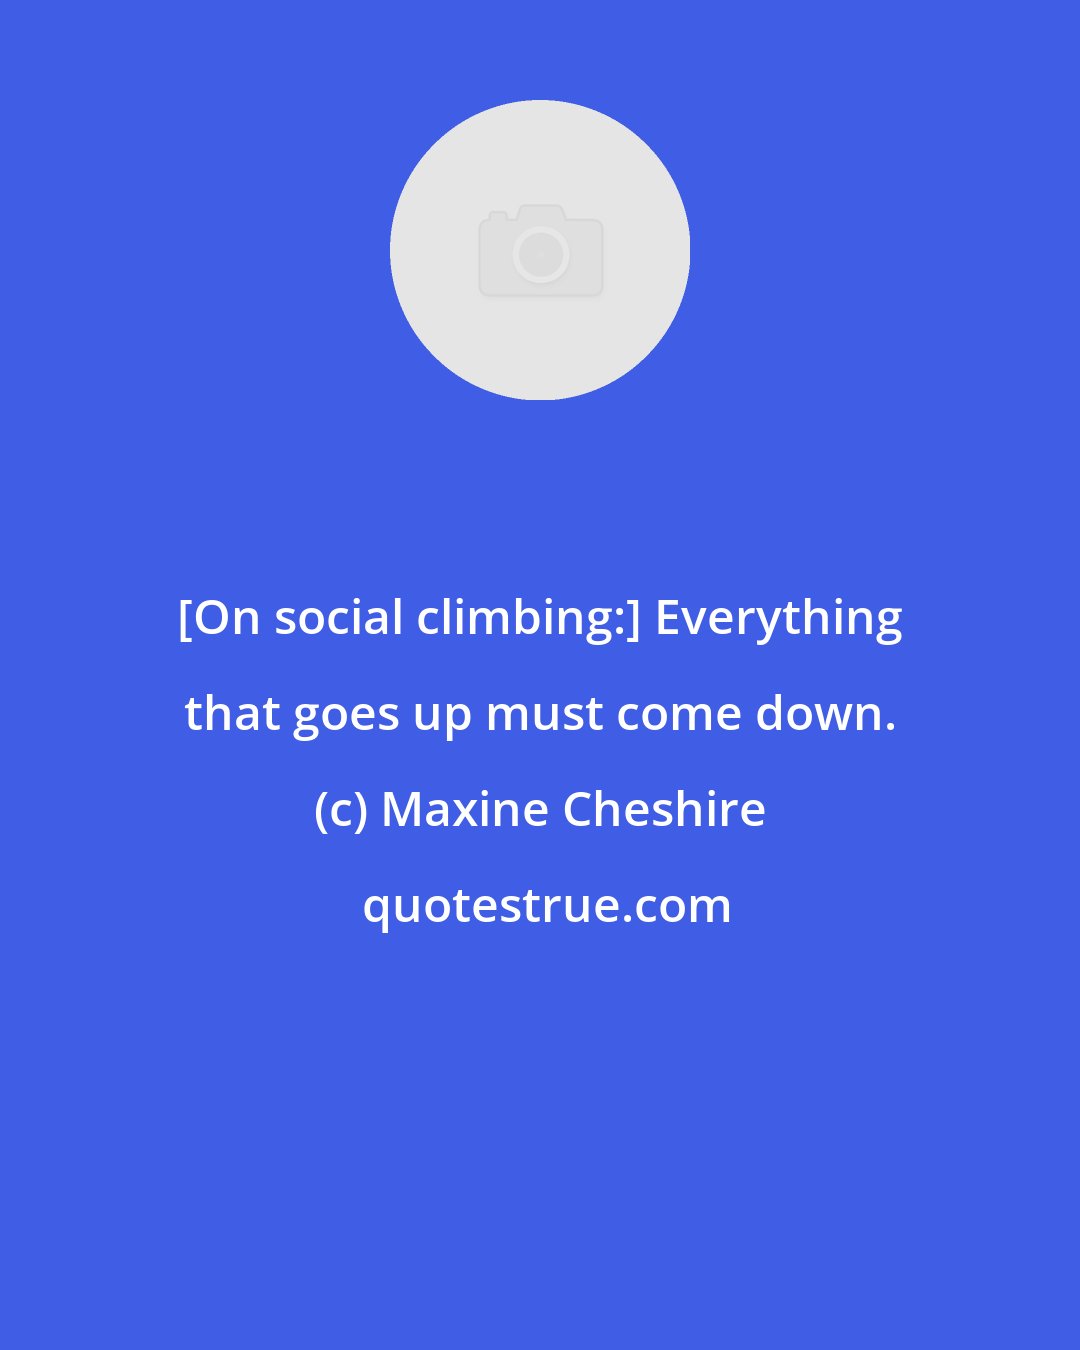 Maxine Cheshire: [On social climbing:] Everything that goes up must come down.